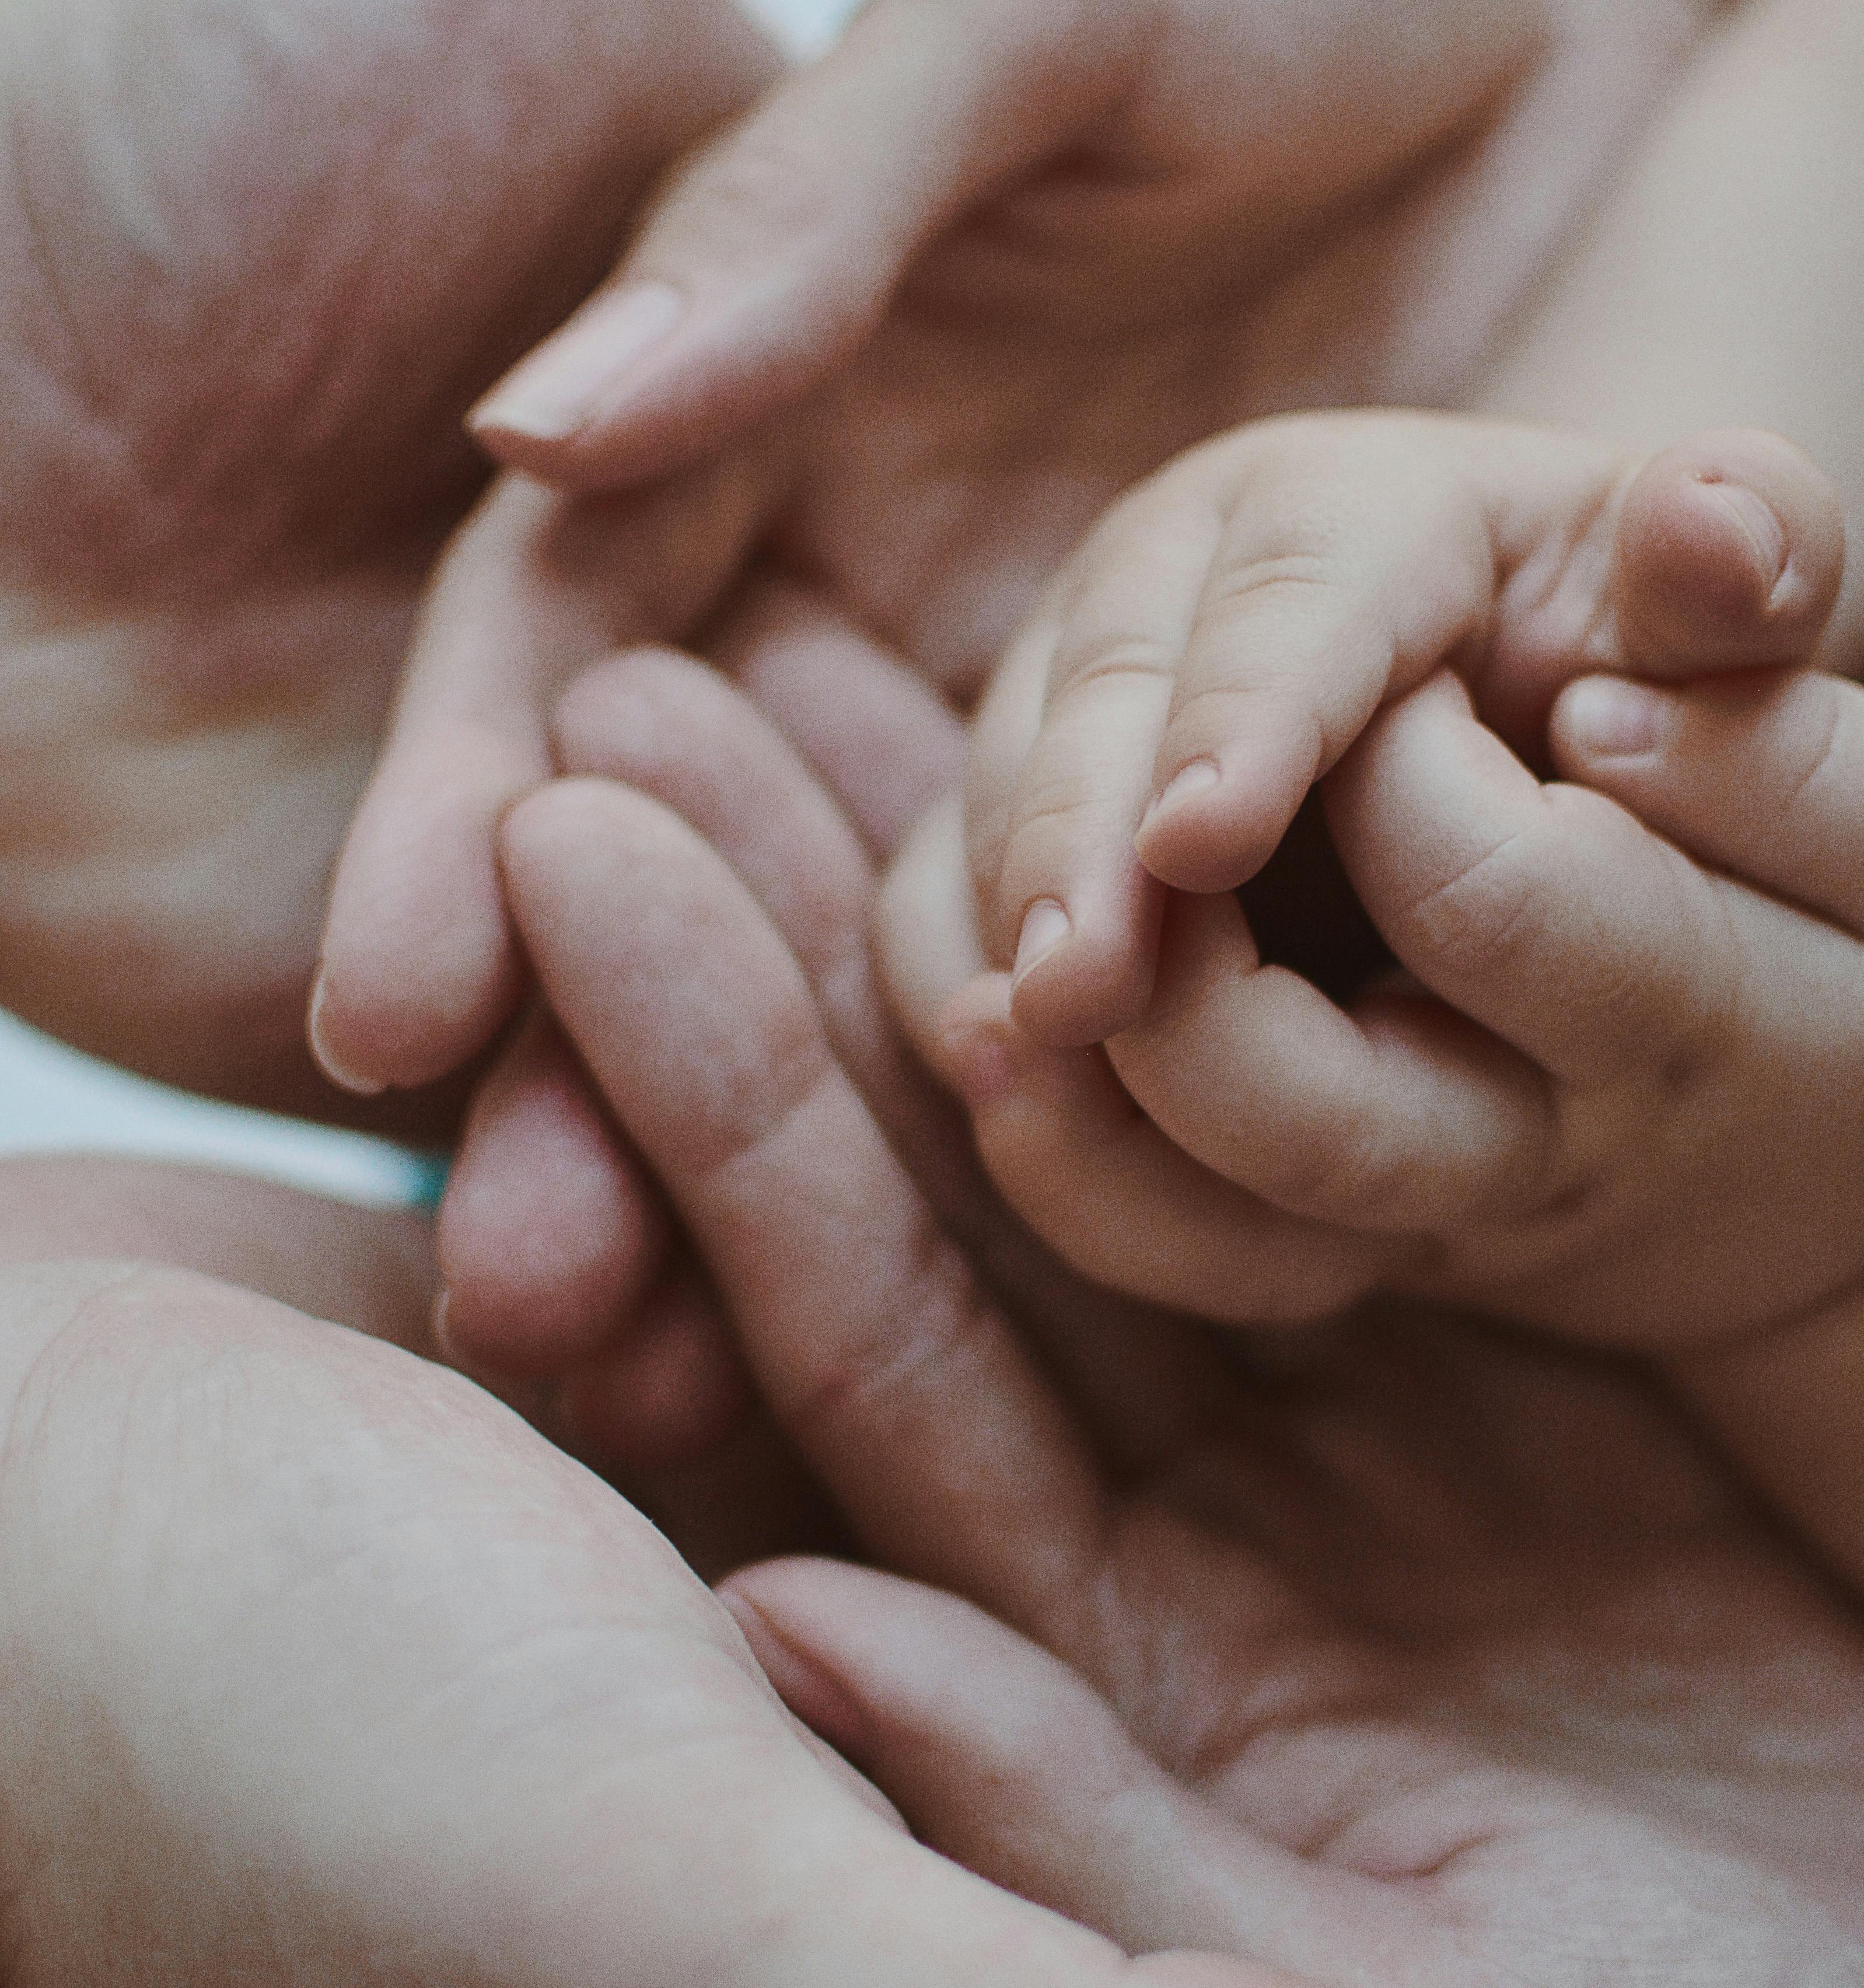 New parents holding their baby's hands | Source: Pexels